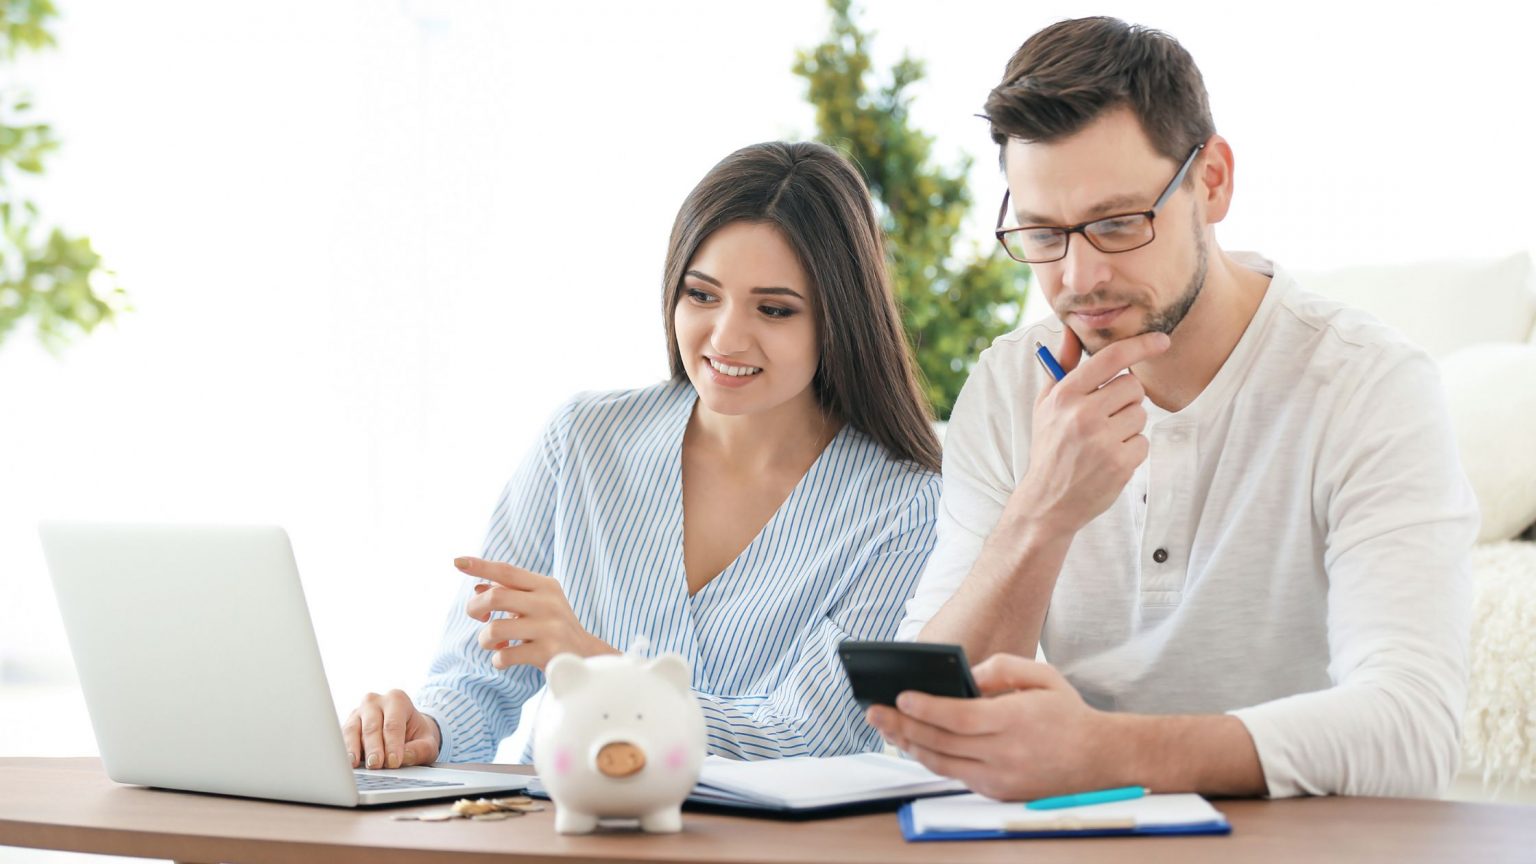 Young male and female couple looking at laptop and discussing money at a table. Male holding calculator. Piggy bank on table.